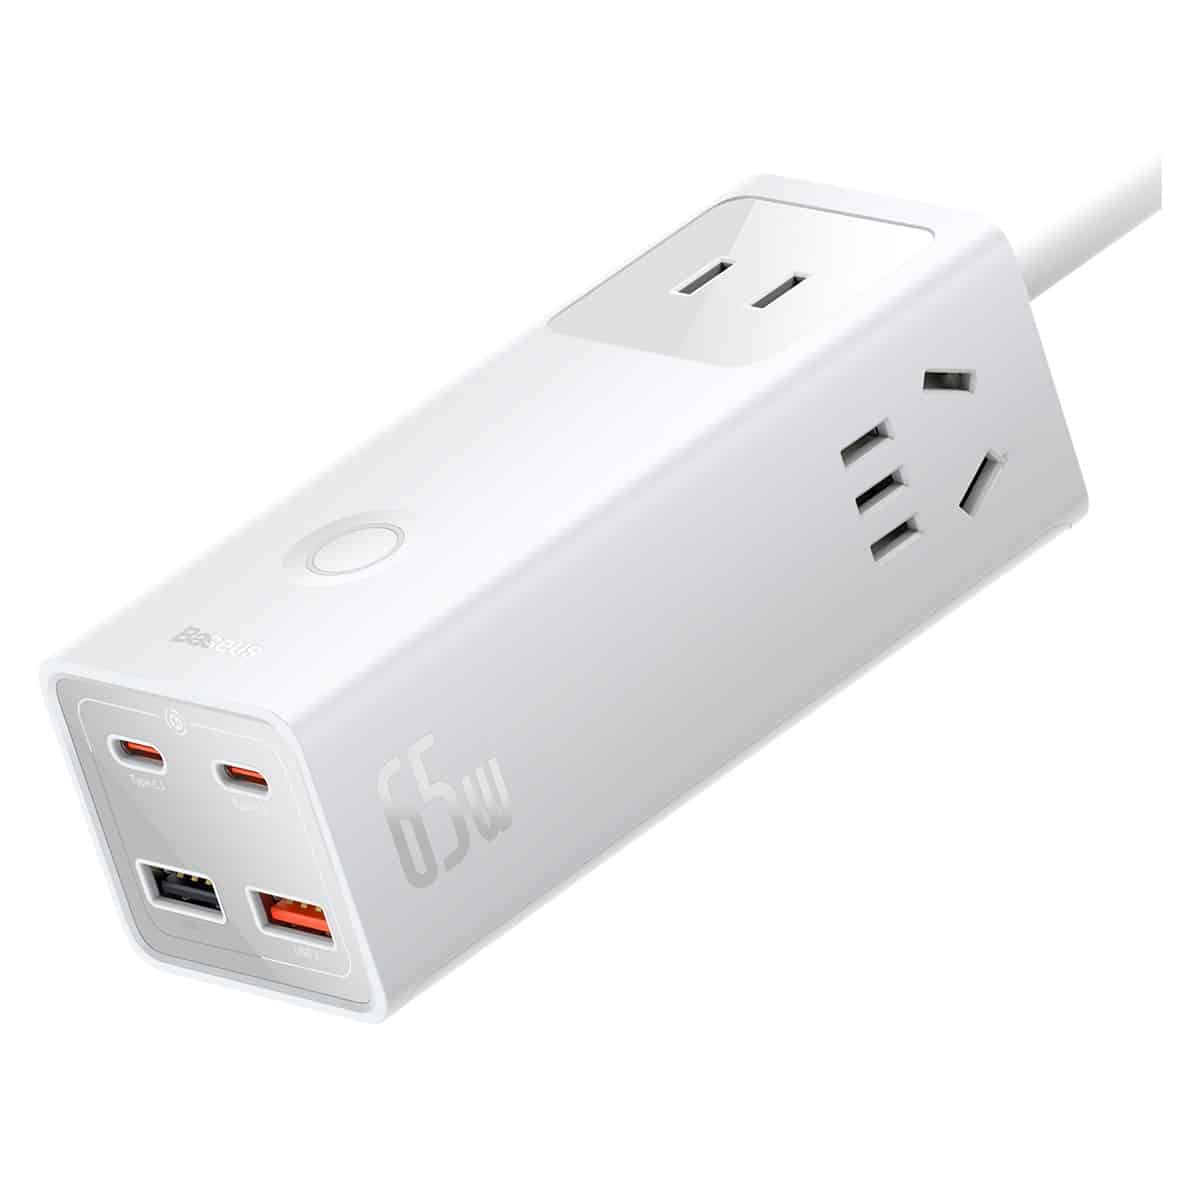 Baseus Extension Cord Power Strip (with 65W 4-Port Power Adapter)